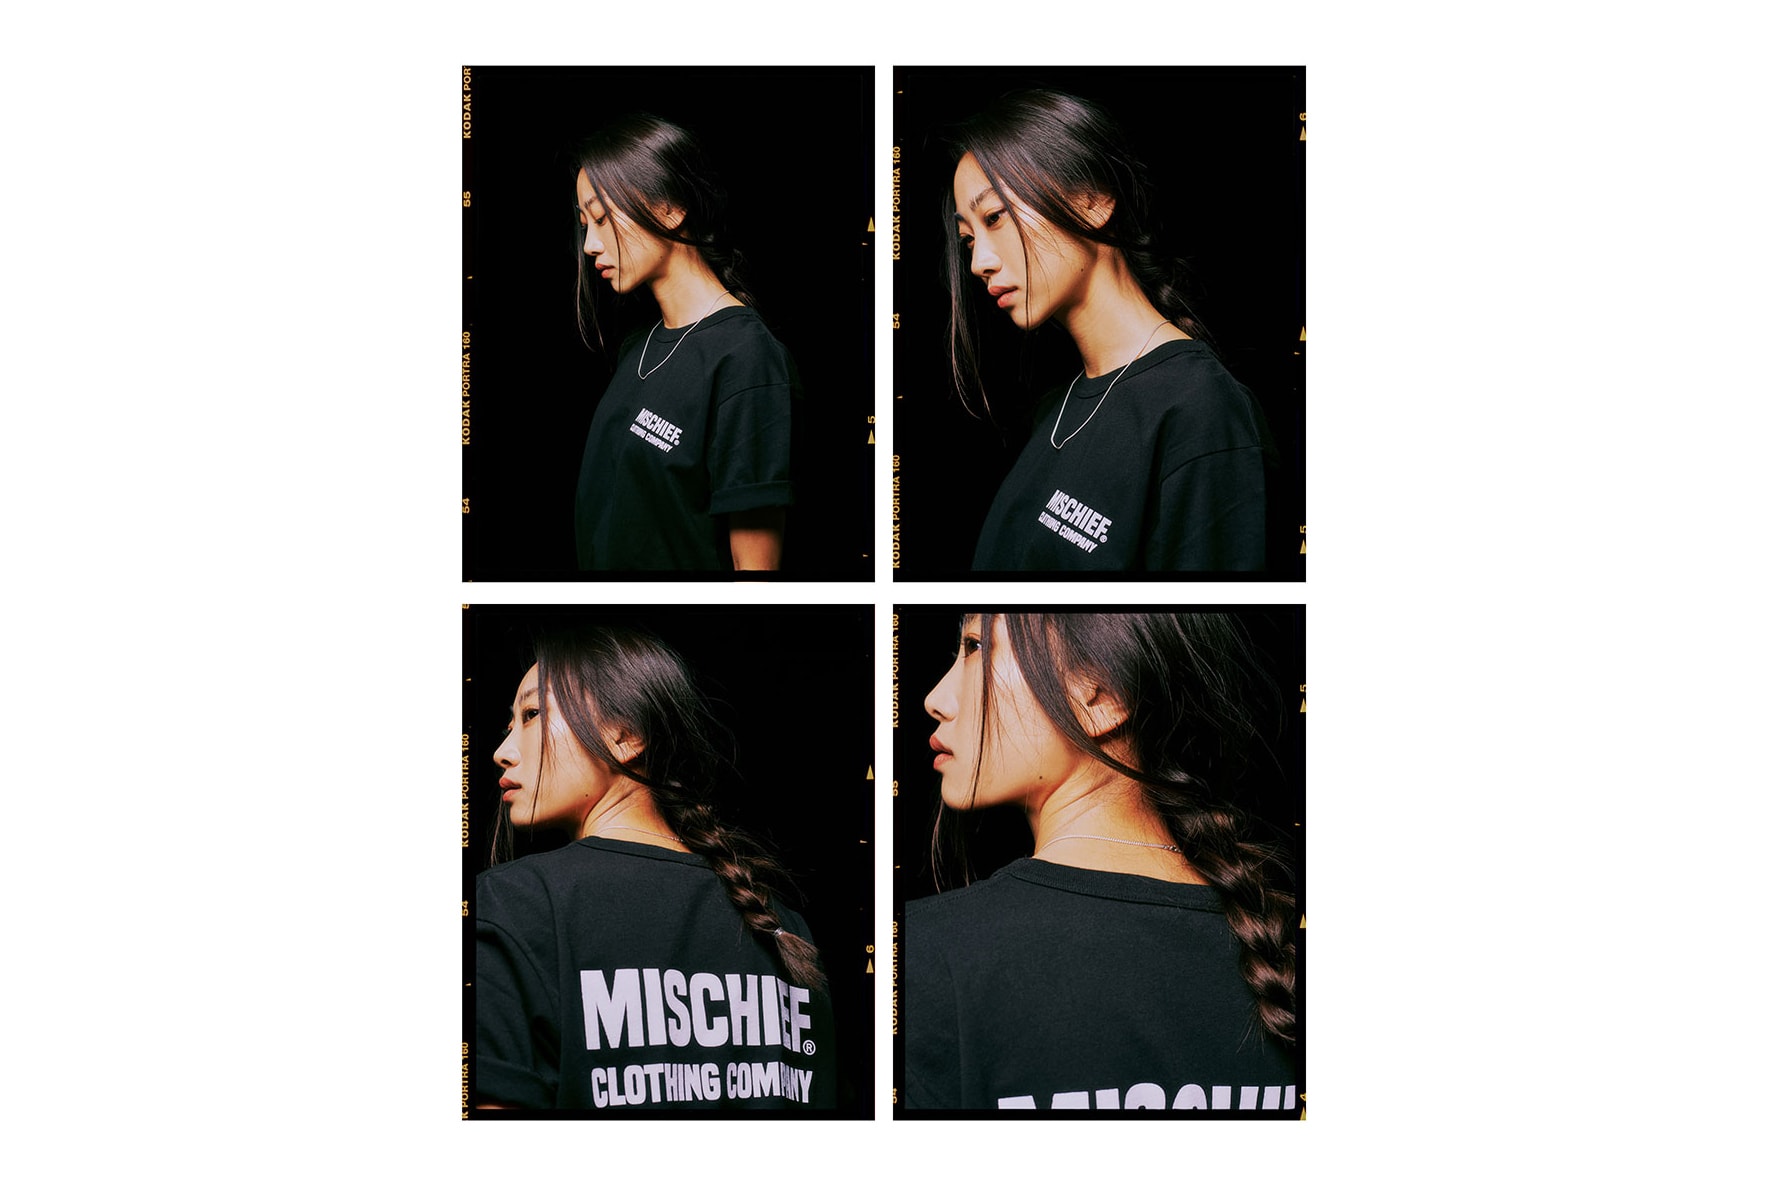 mischief russell athletic japan collection tees tshirts coach jackets seoul popup